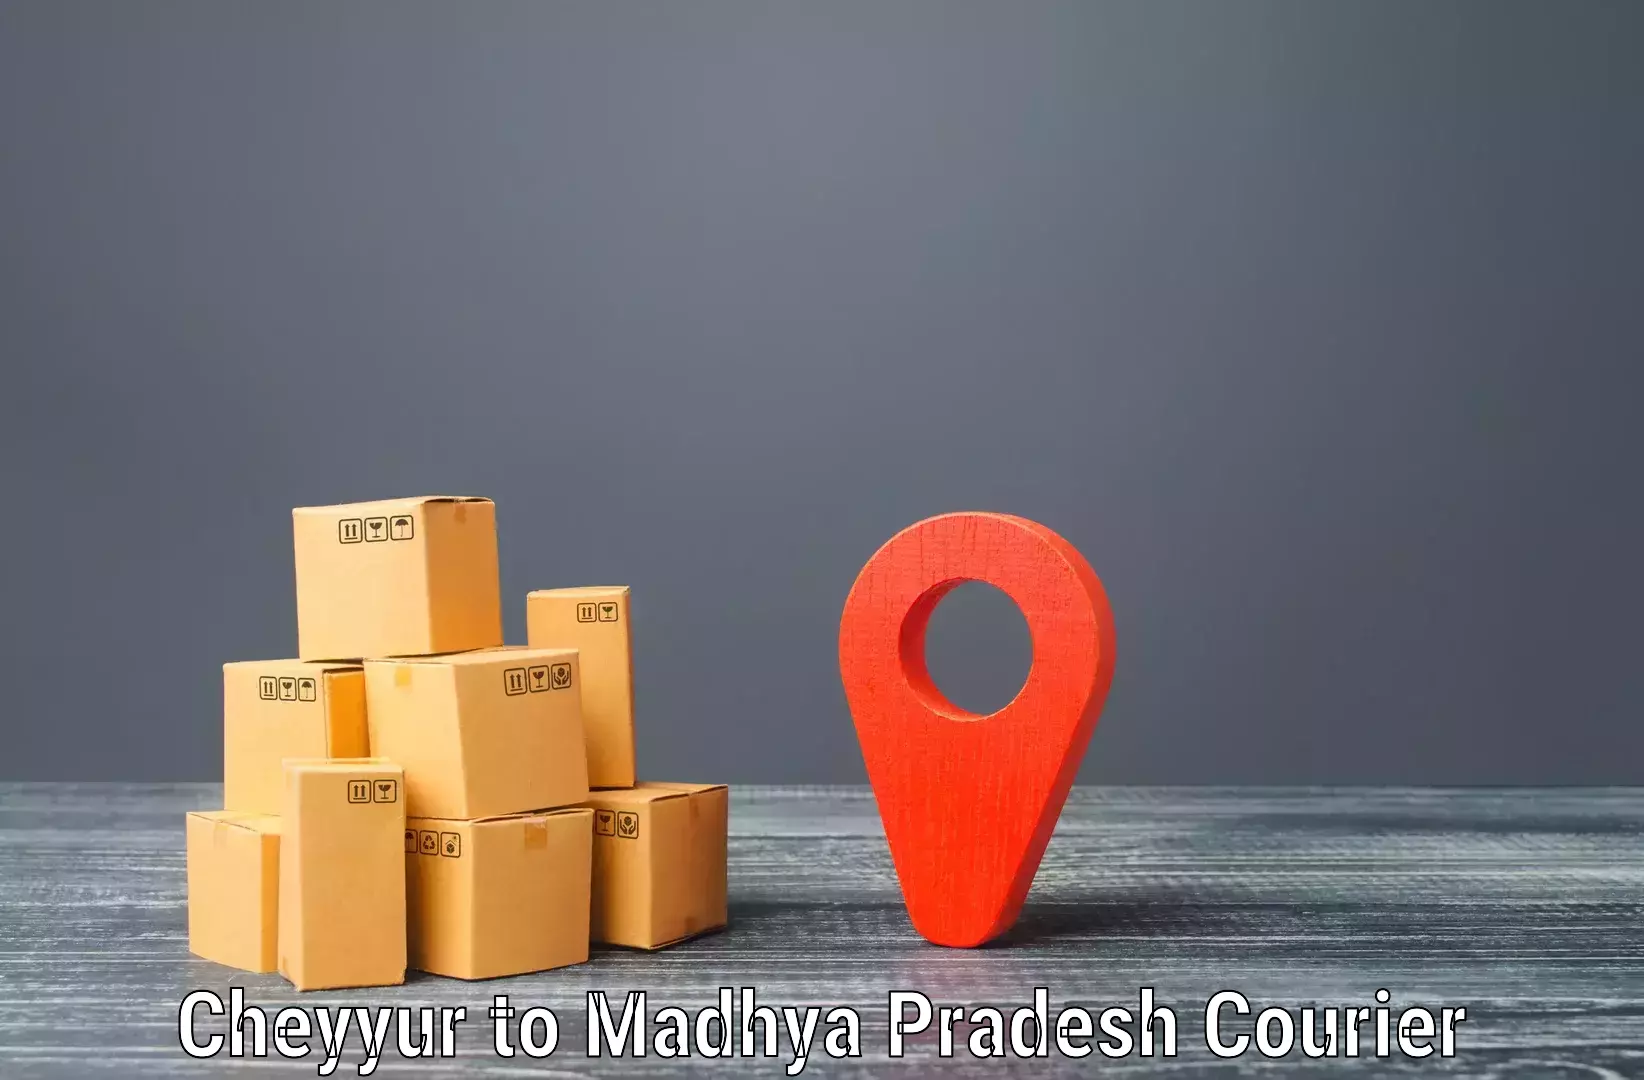 Affordable logistics services Cheyyur to Petlawad